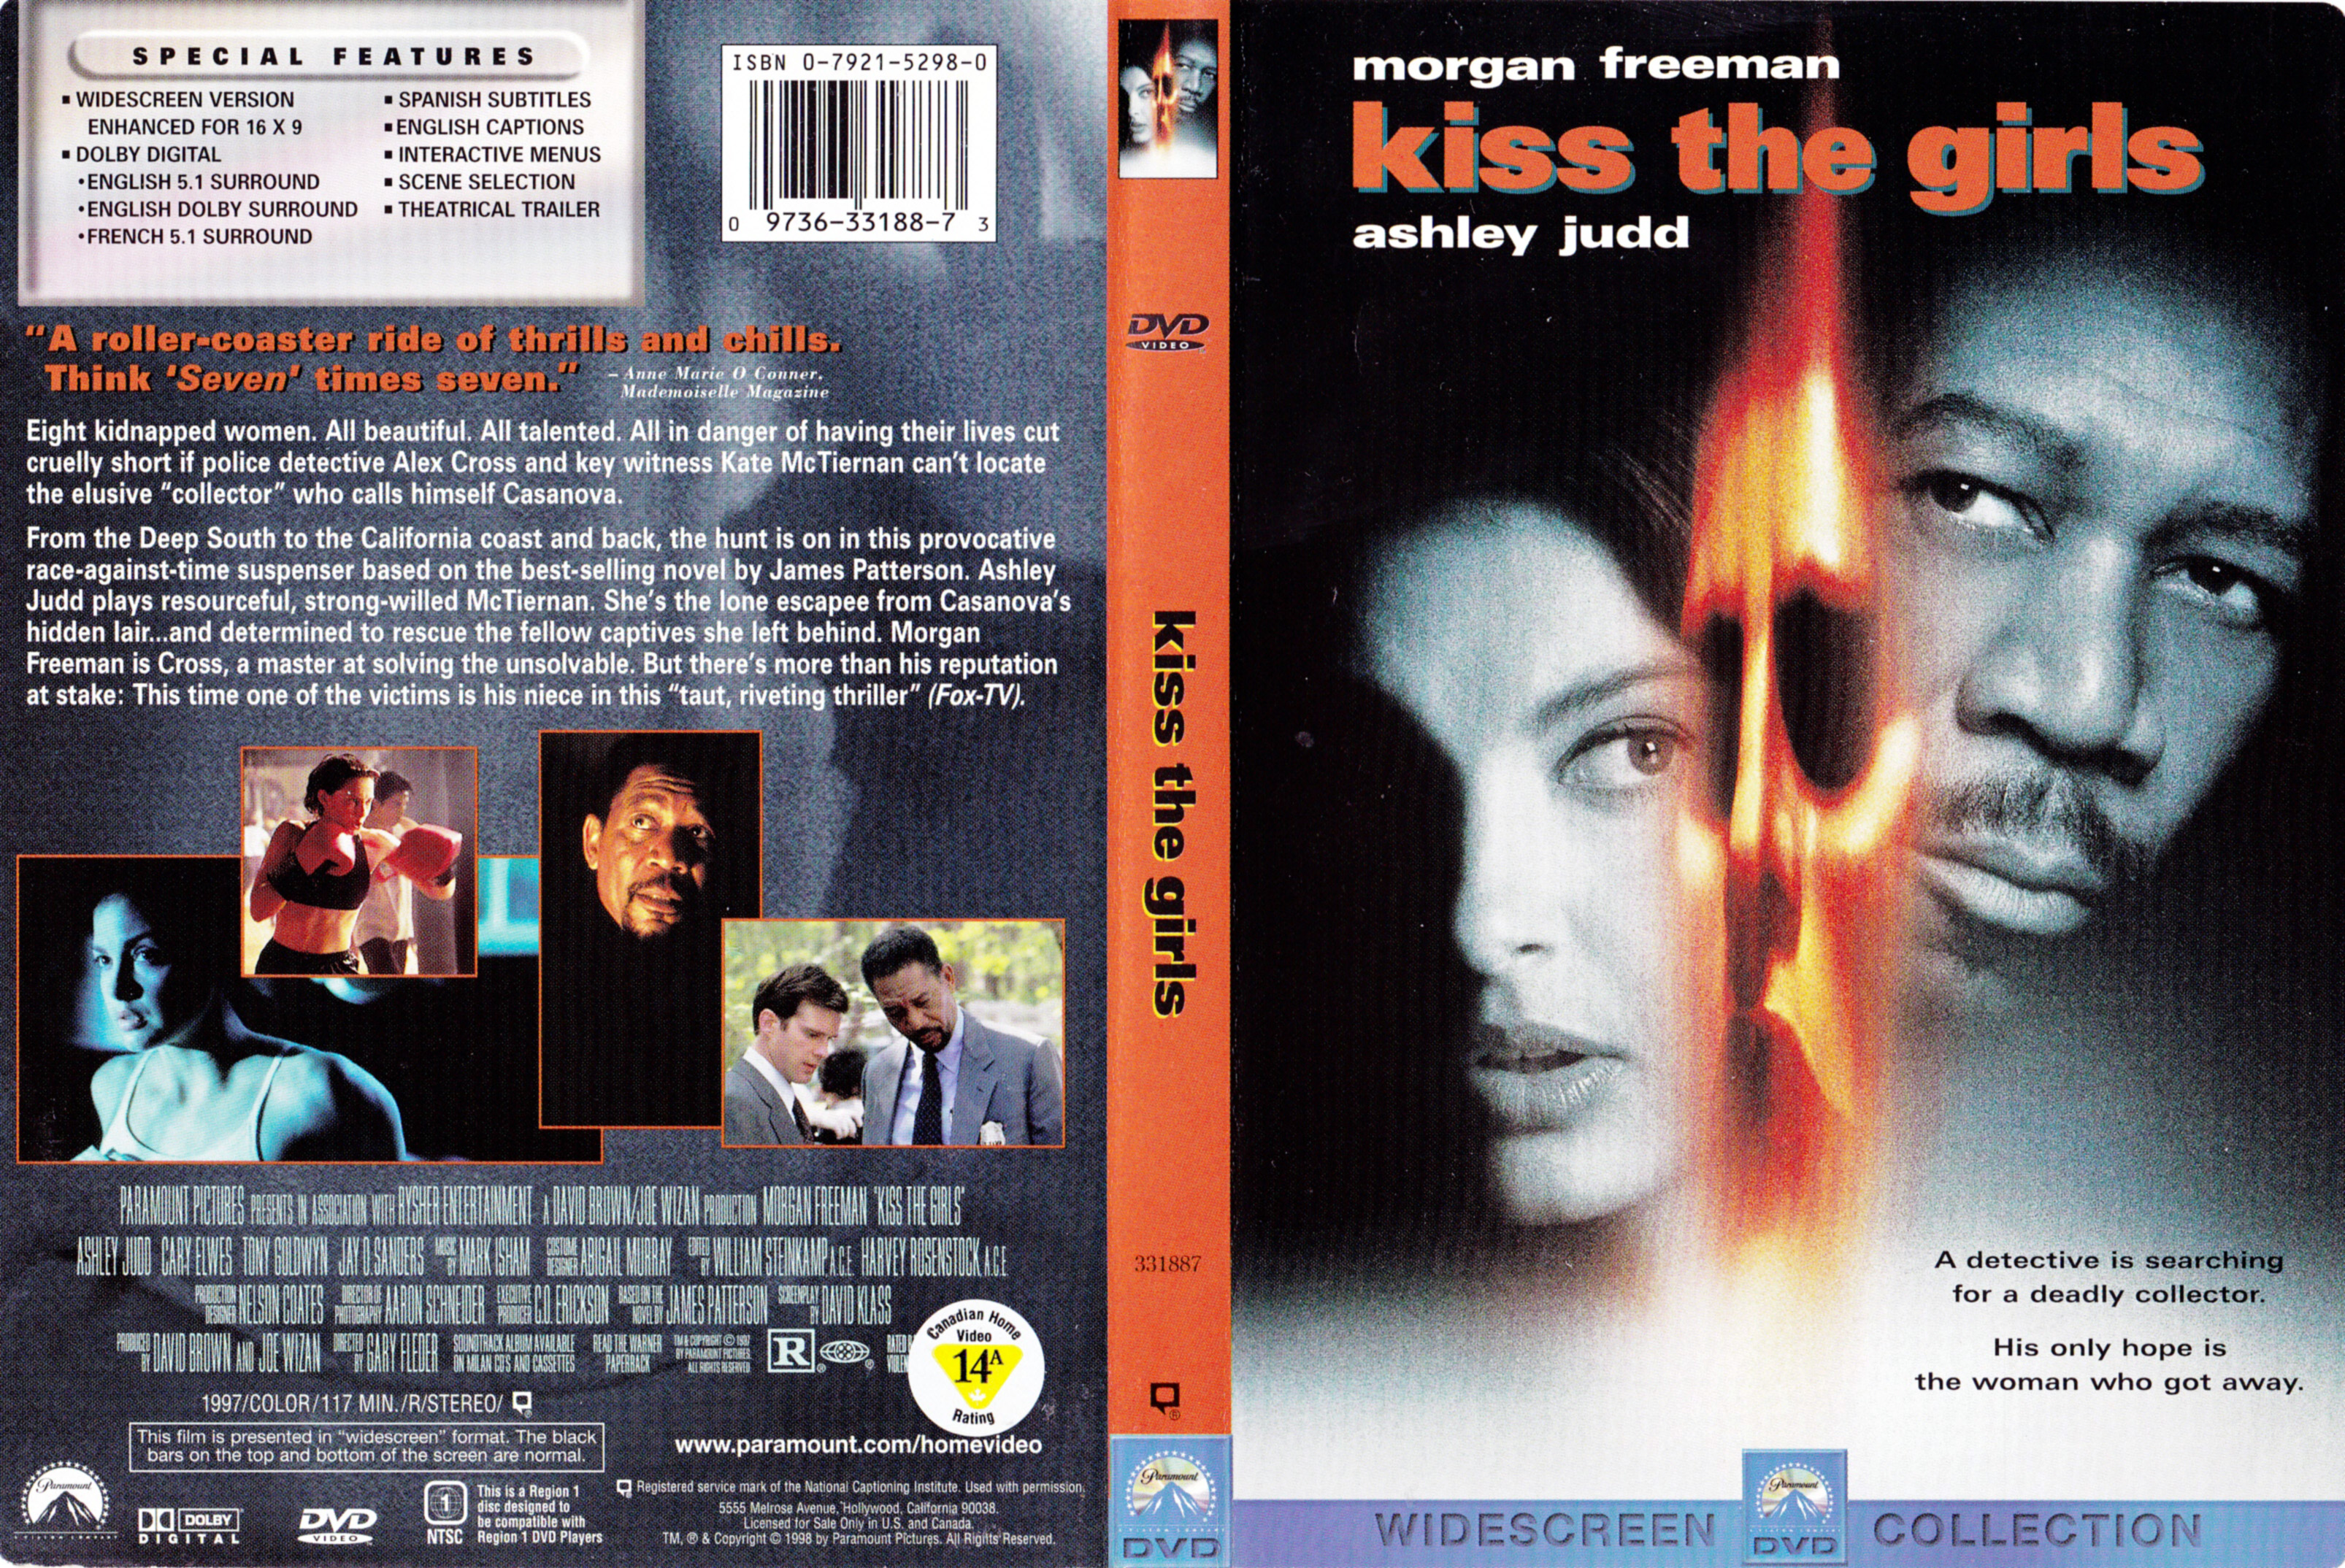 Jaquette DVD Kiss the girls (Canadienne)